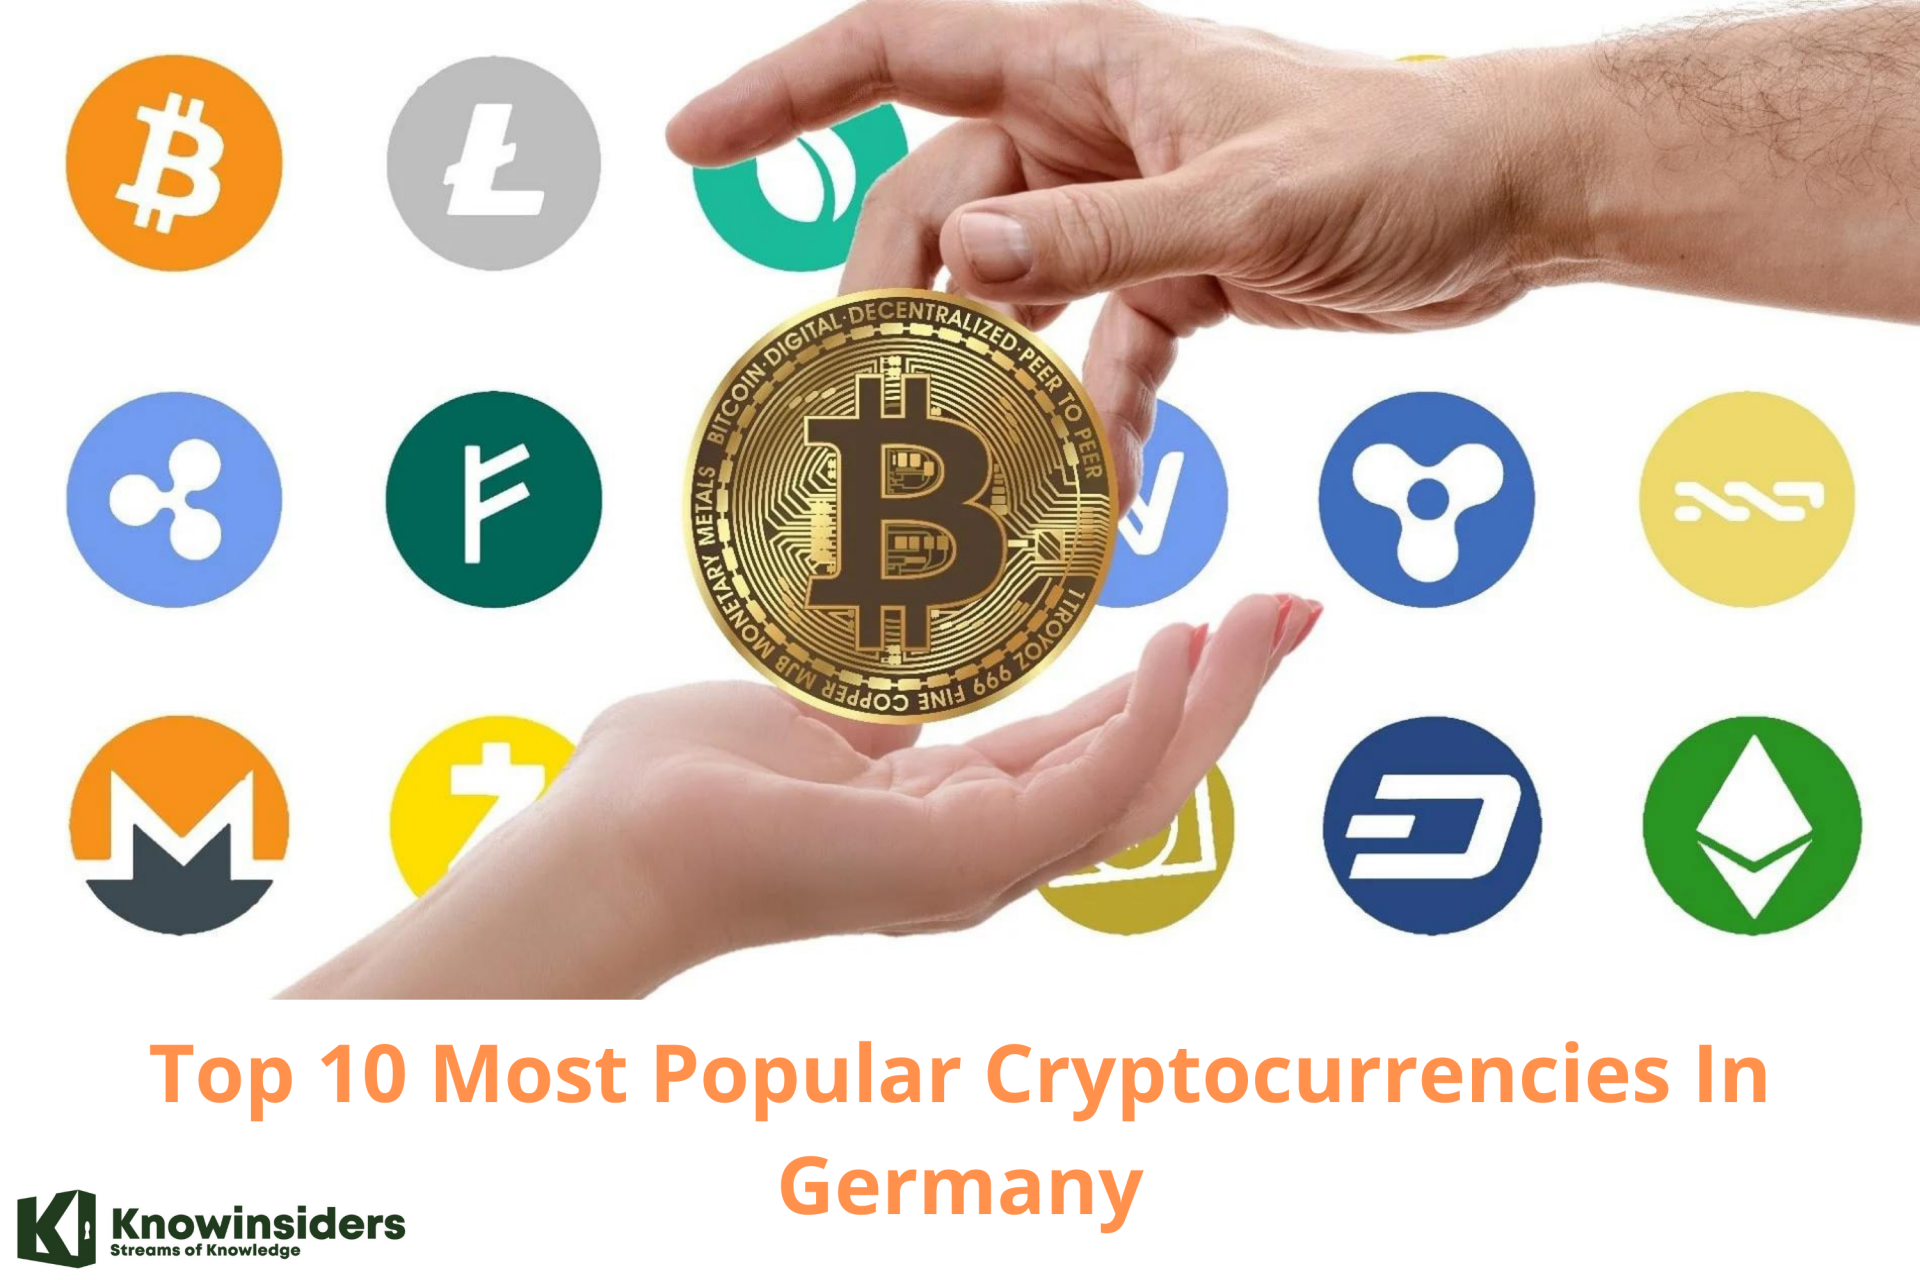 Top 10 Most Popular Cryptocurrencies In Germany